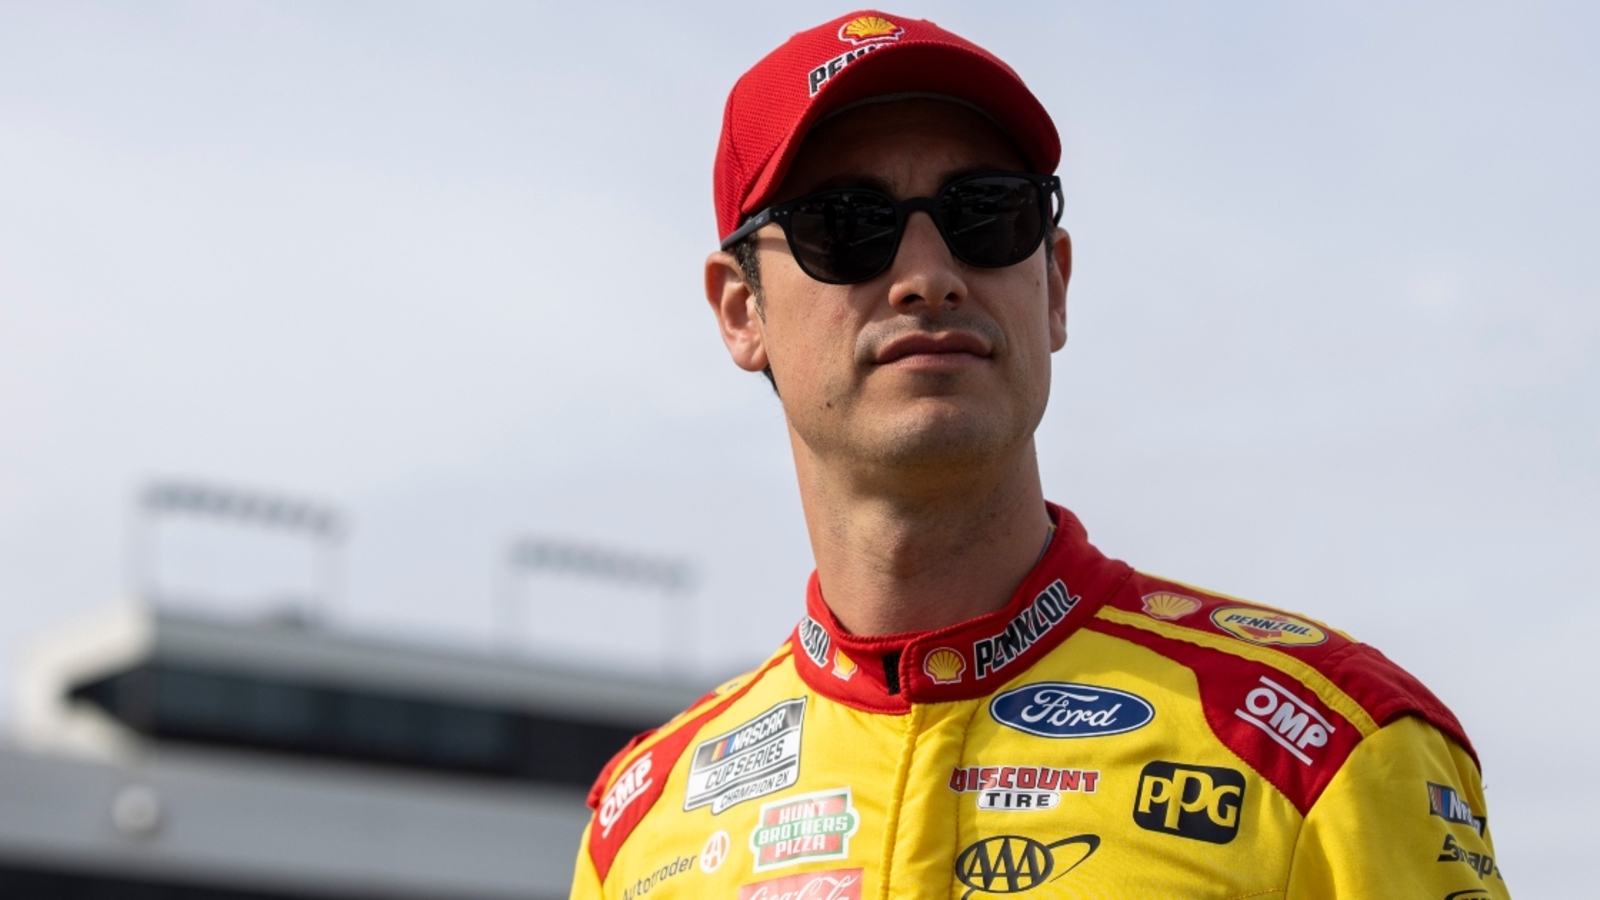 Joey Logano calls for consistency from NASCAR in wake of Ricky Stenhouse Jr.-Kyle Busch fight